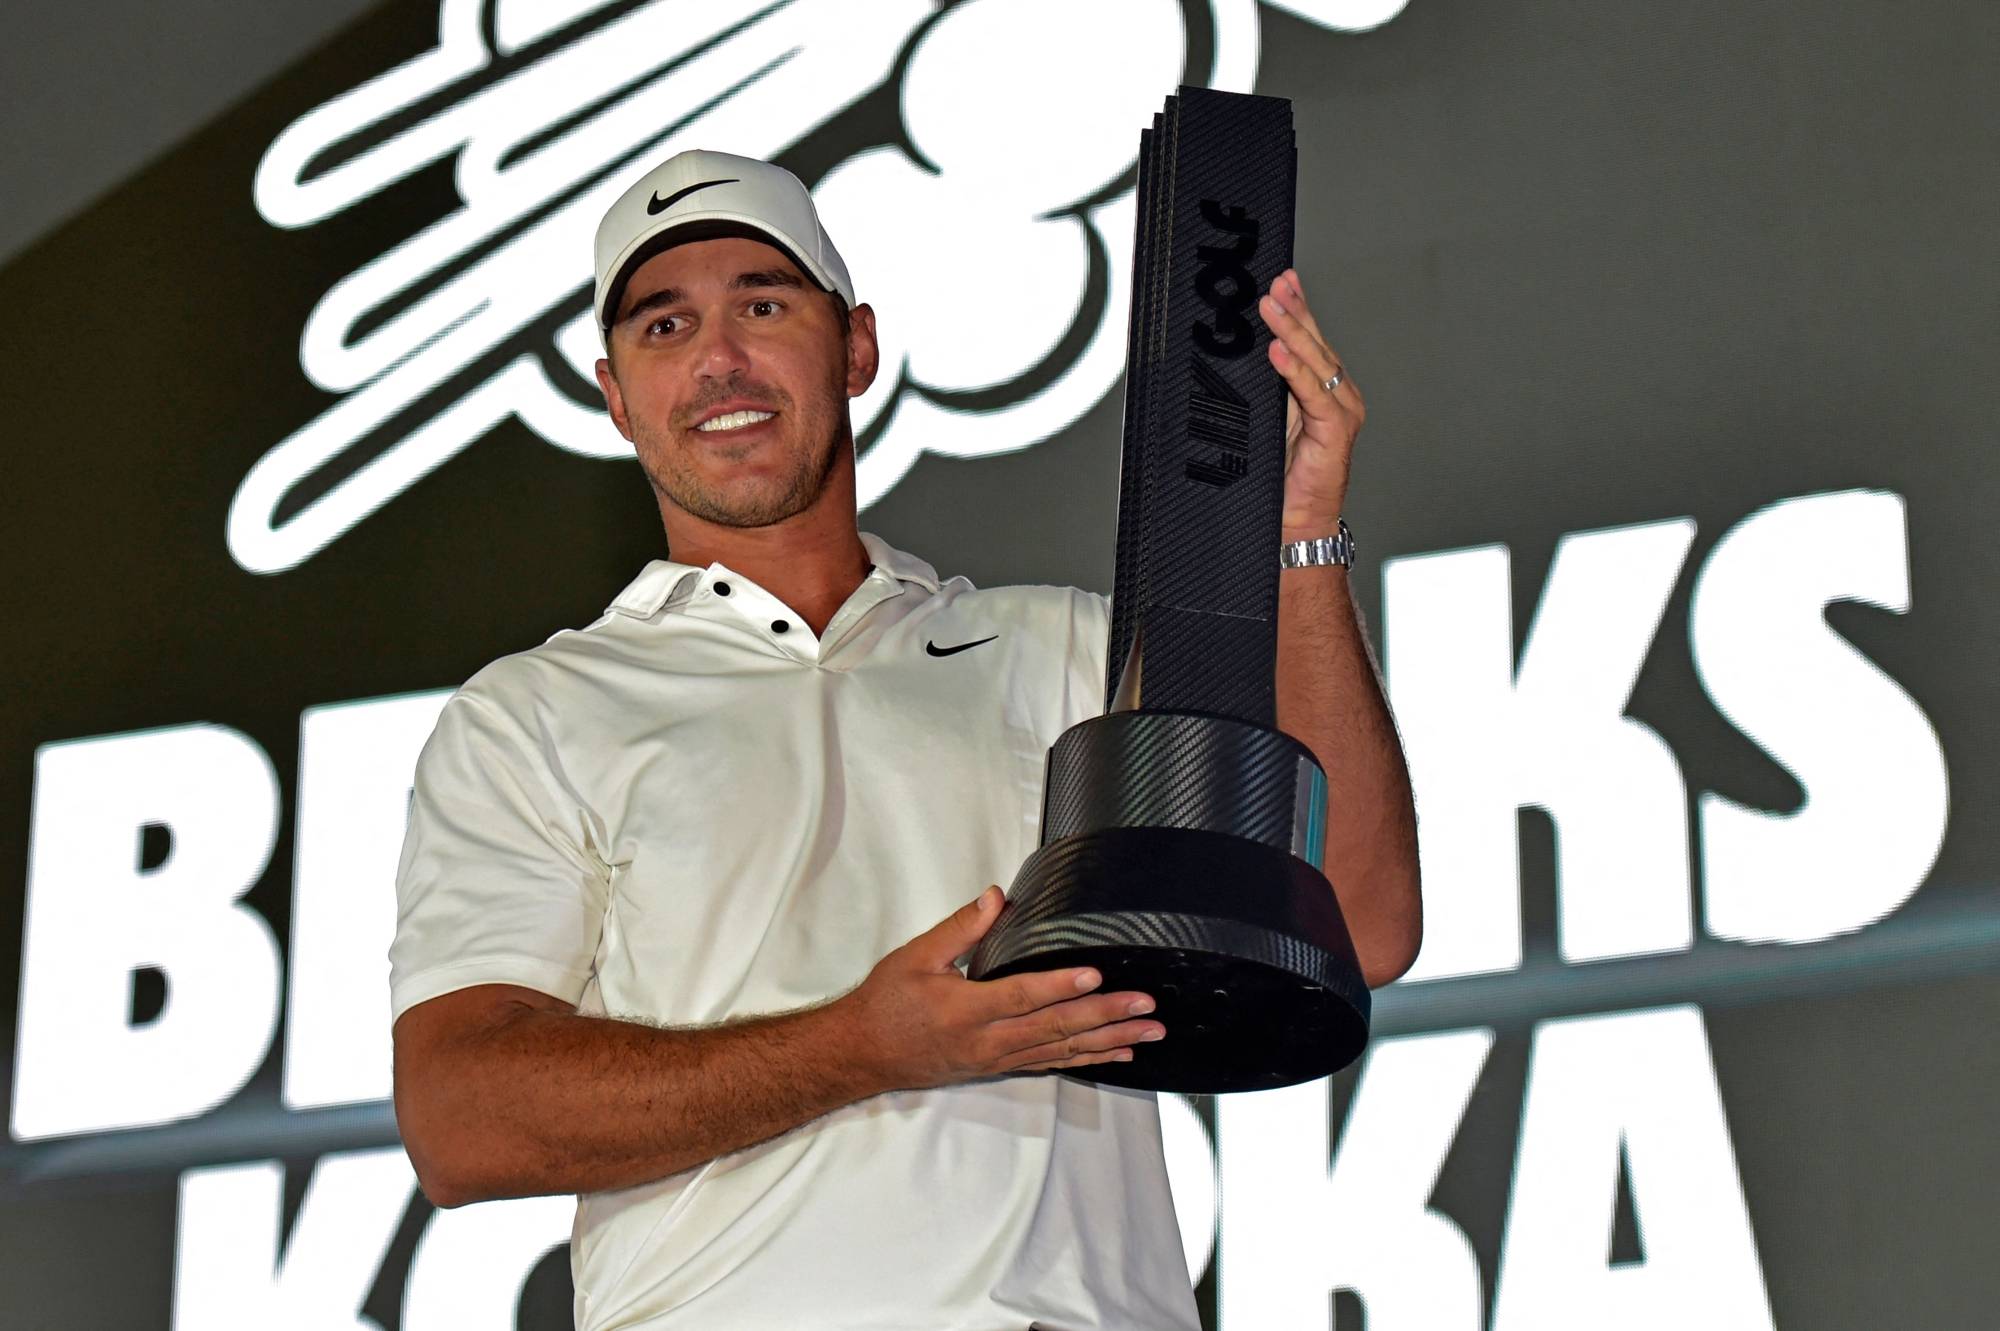 Brooks Koepka cashes in during playoff to earn big payday in final individual event of LIV Golf season